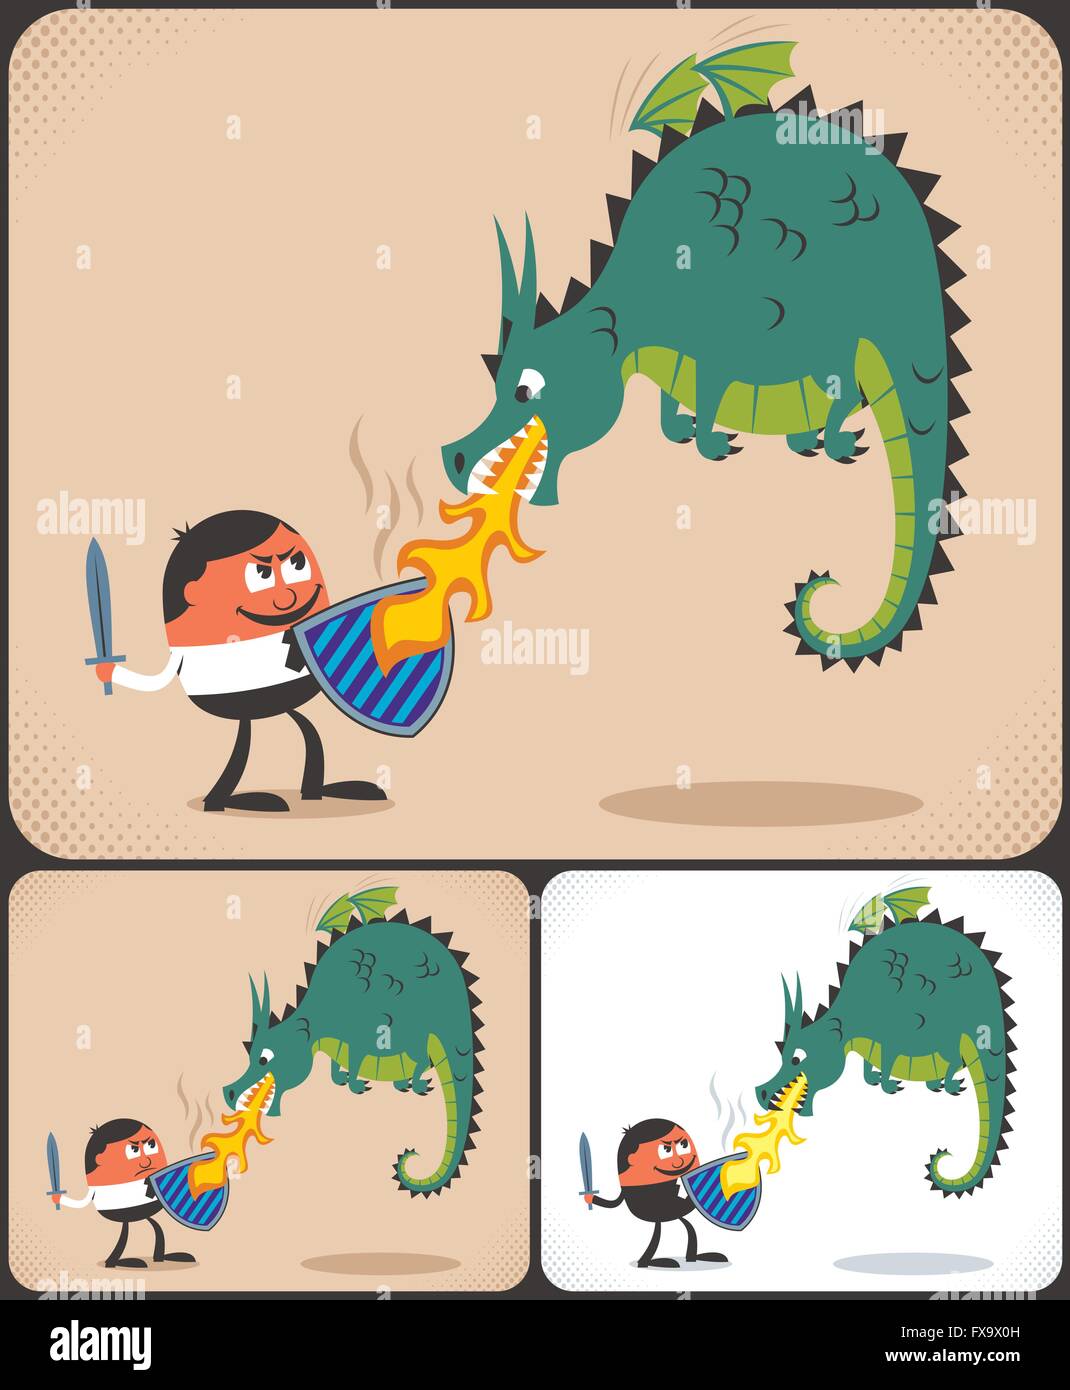 Conceptual illustration for facing challenge. The illustration is in 3 different versions. Stock Vector